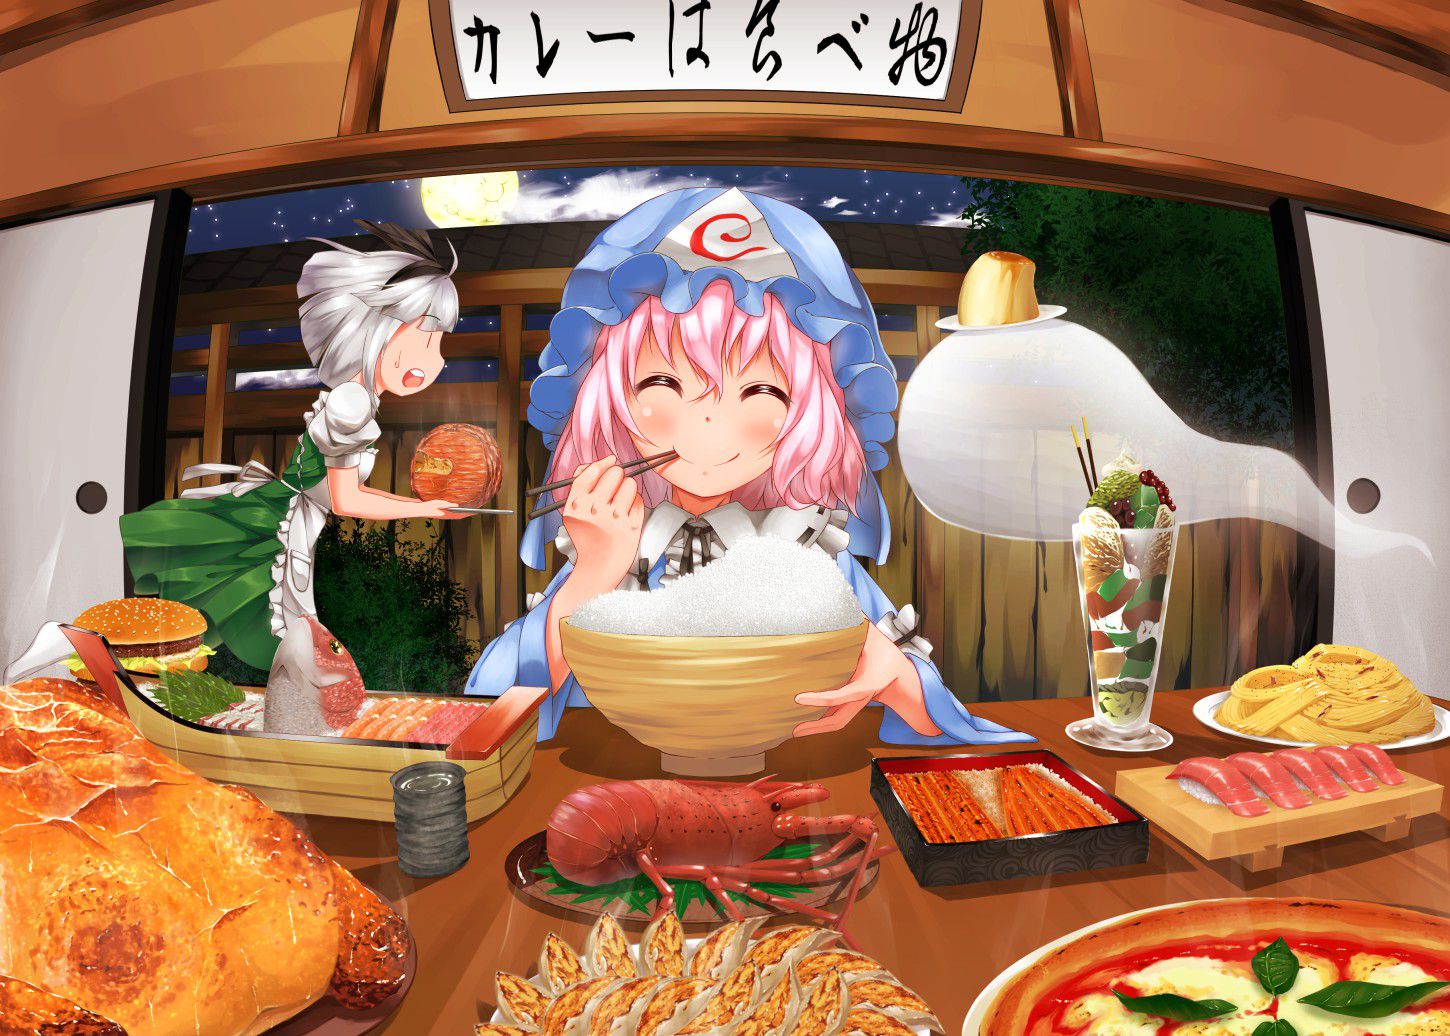 Secondary image summary of the girl eating delicious food! 37